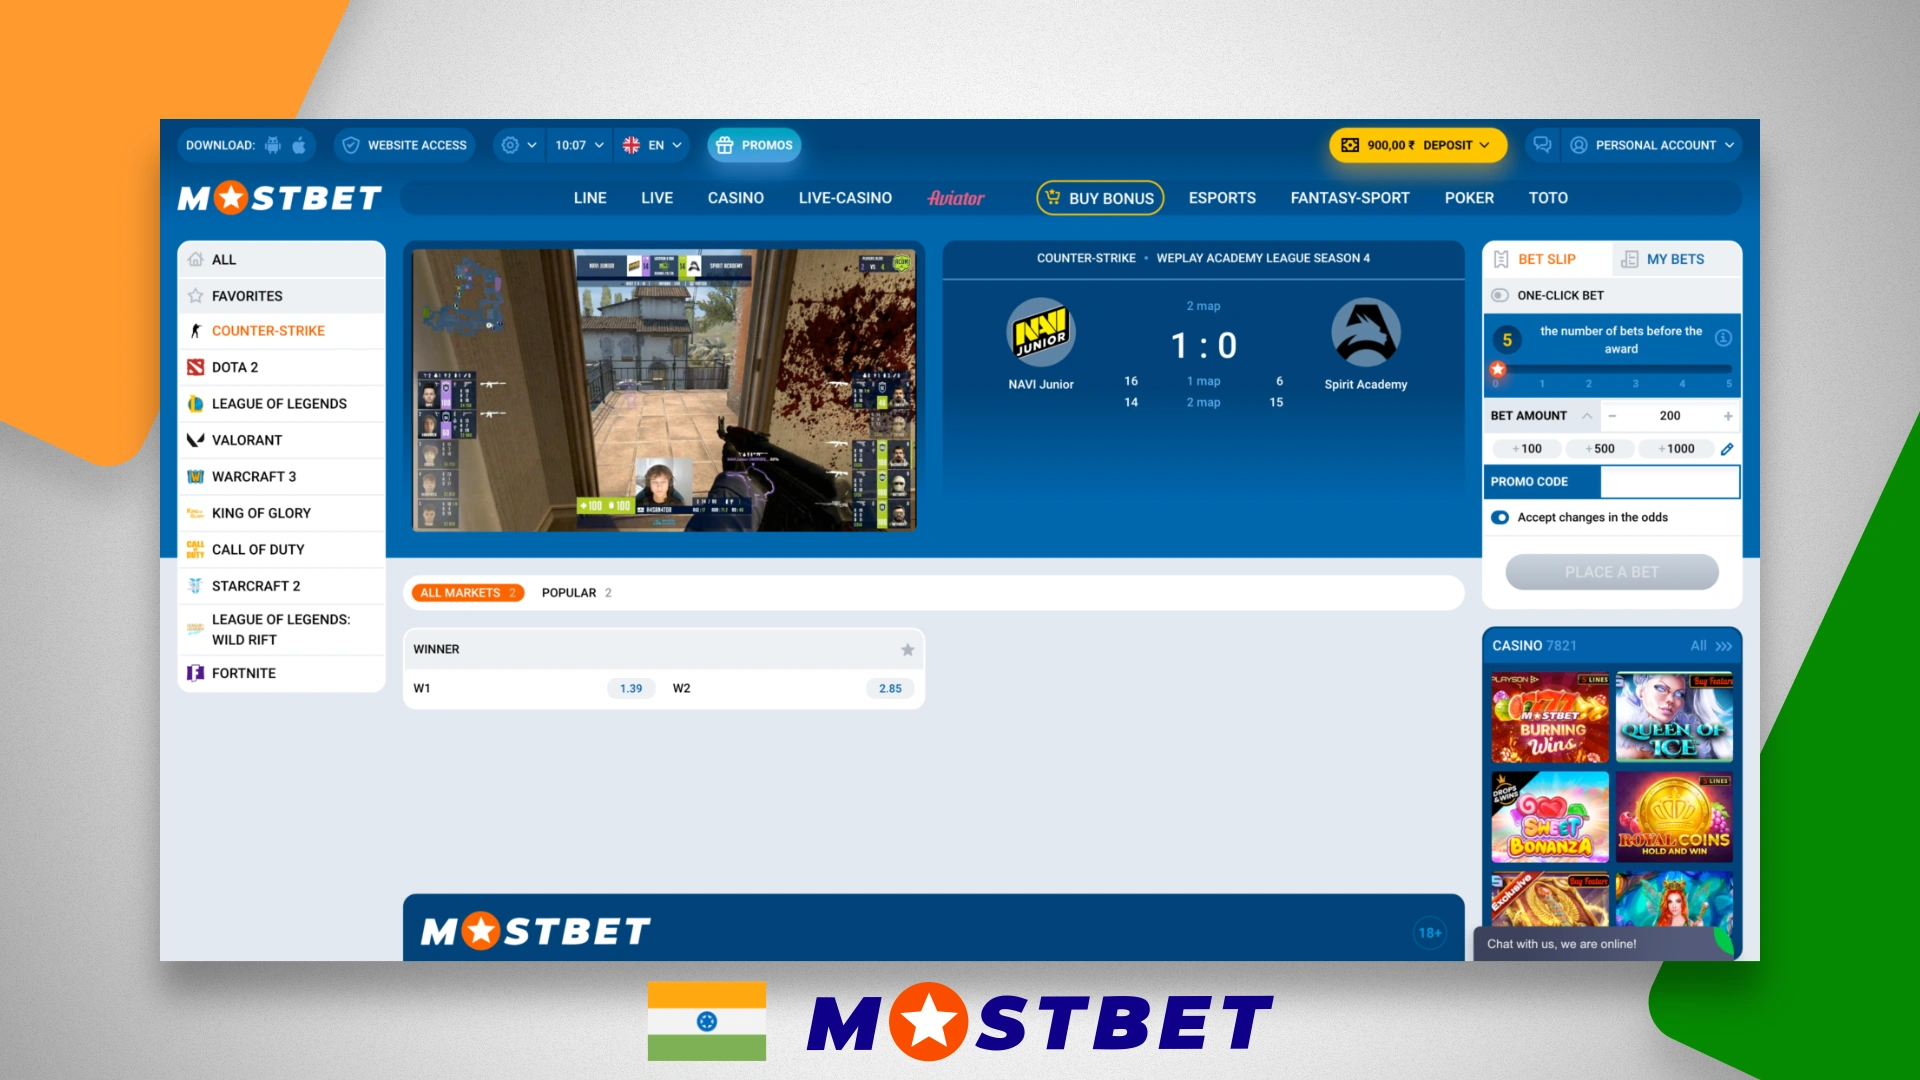 Page of the selected eSports match with live broadcast on Mostbet